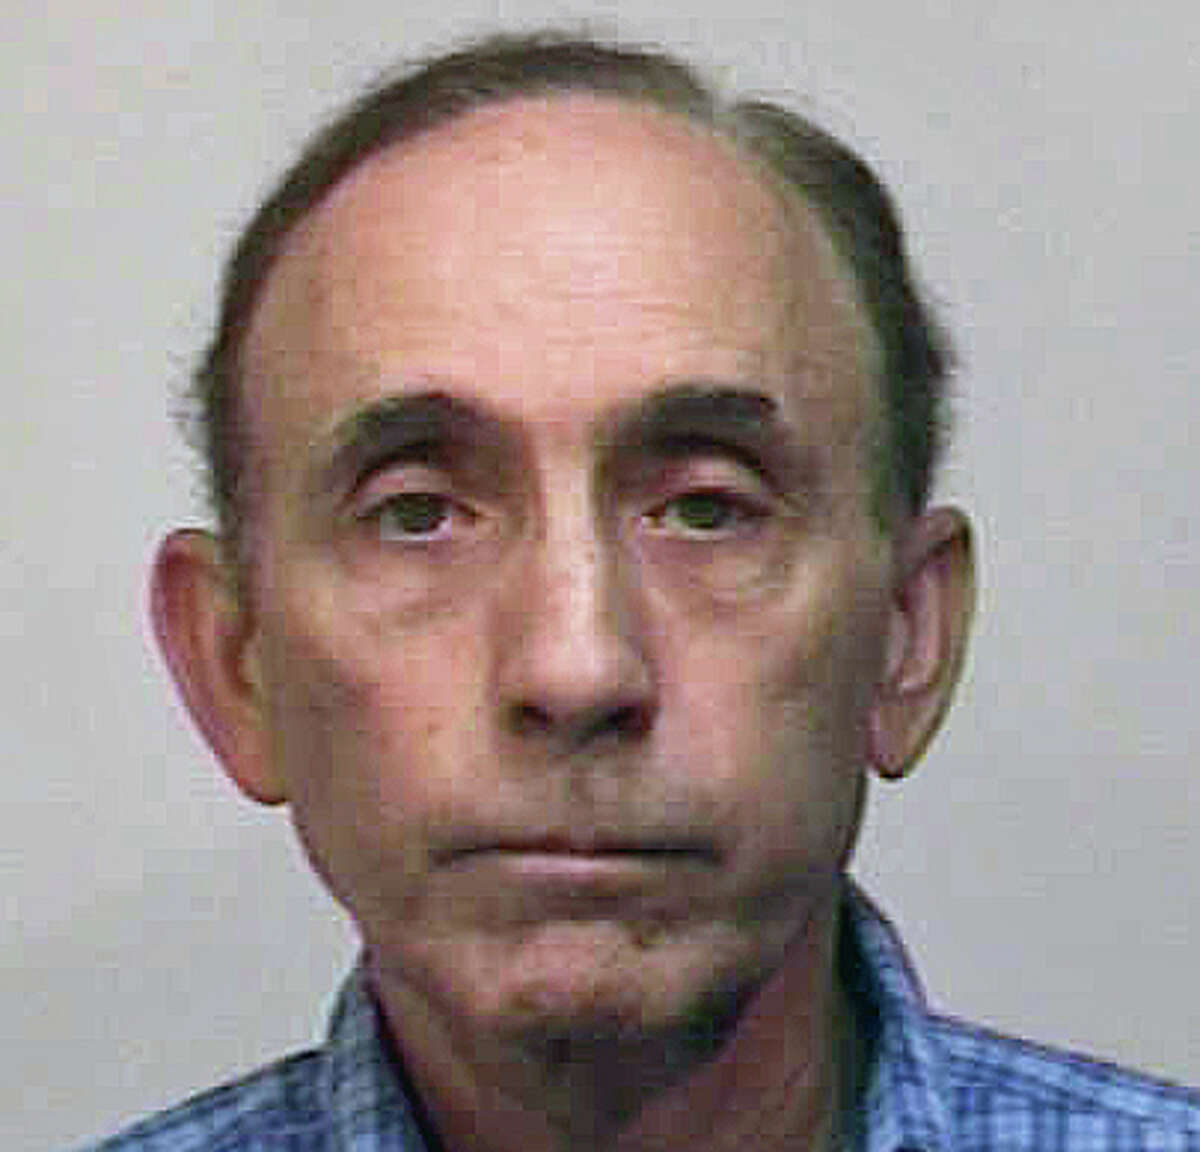 Stuart Rosenberg, 63, of Branford, was charged after police said he received a package of marijuana in the mail.